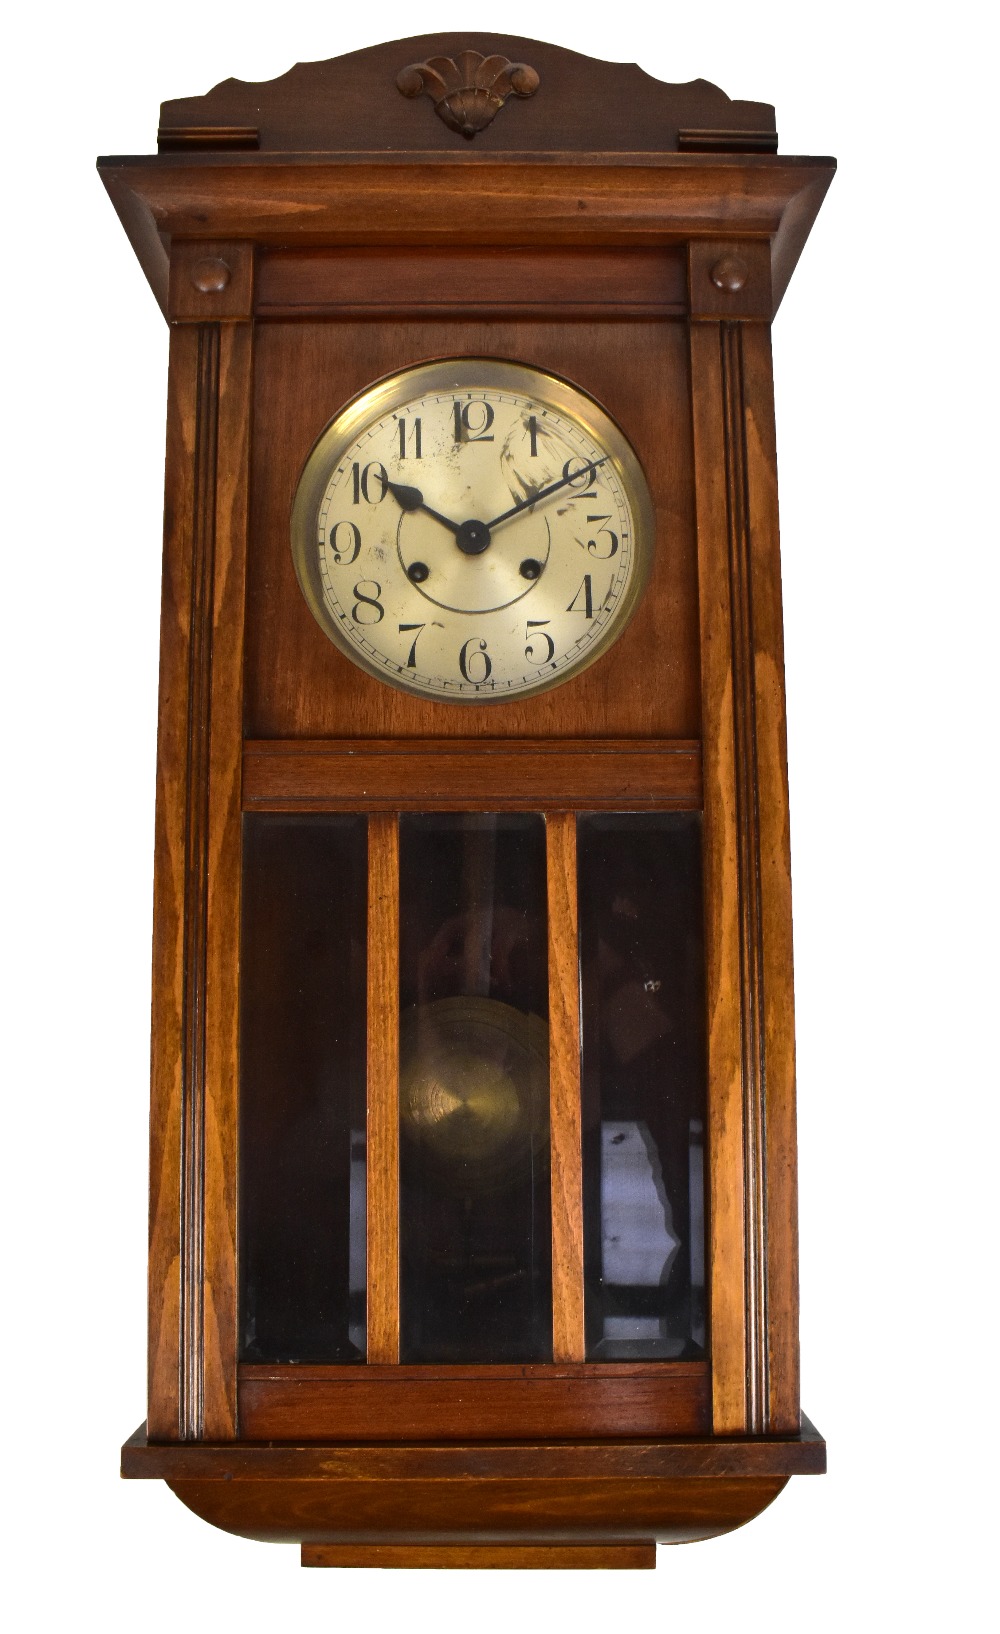 An early to mid 20th century rectangular wall clock.